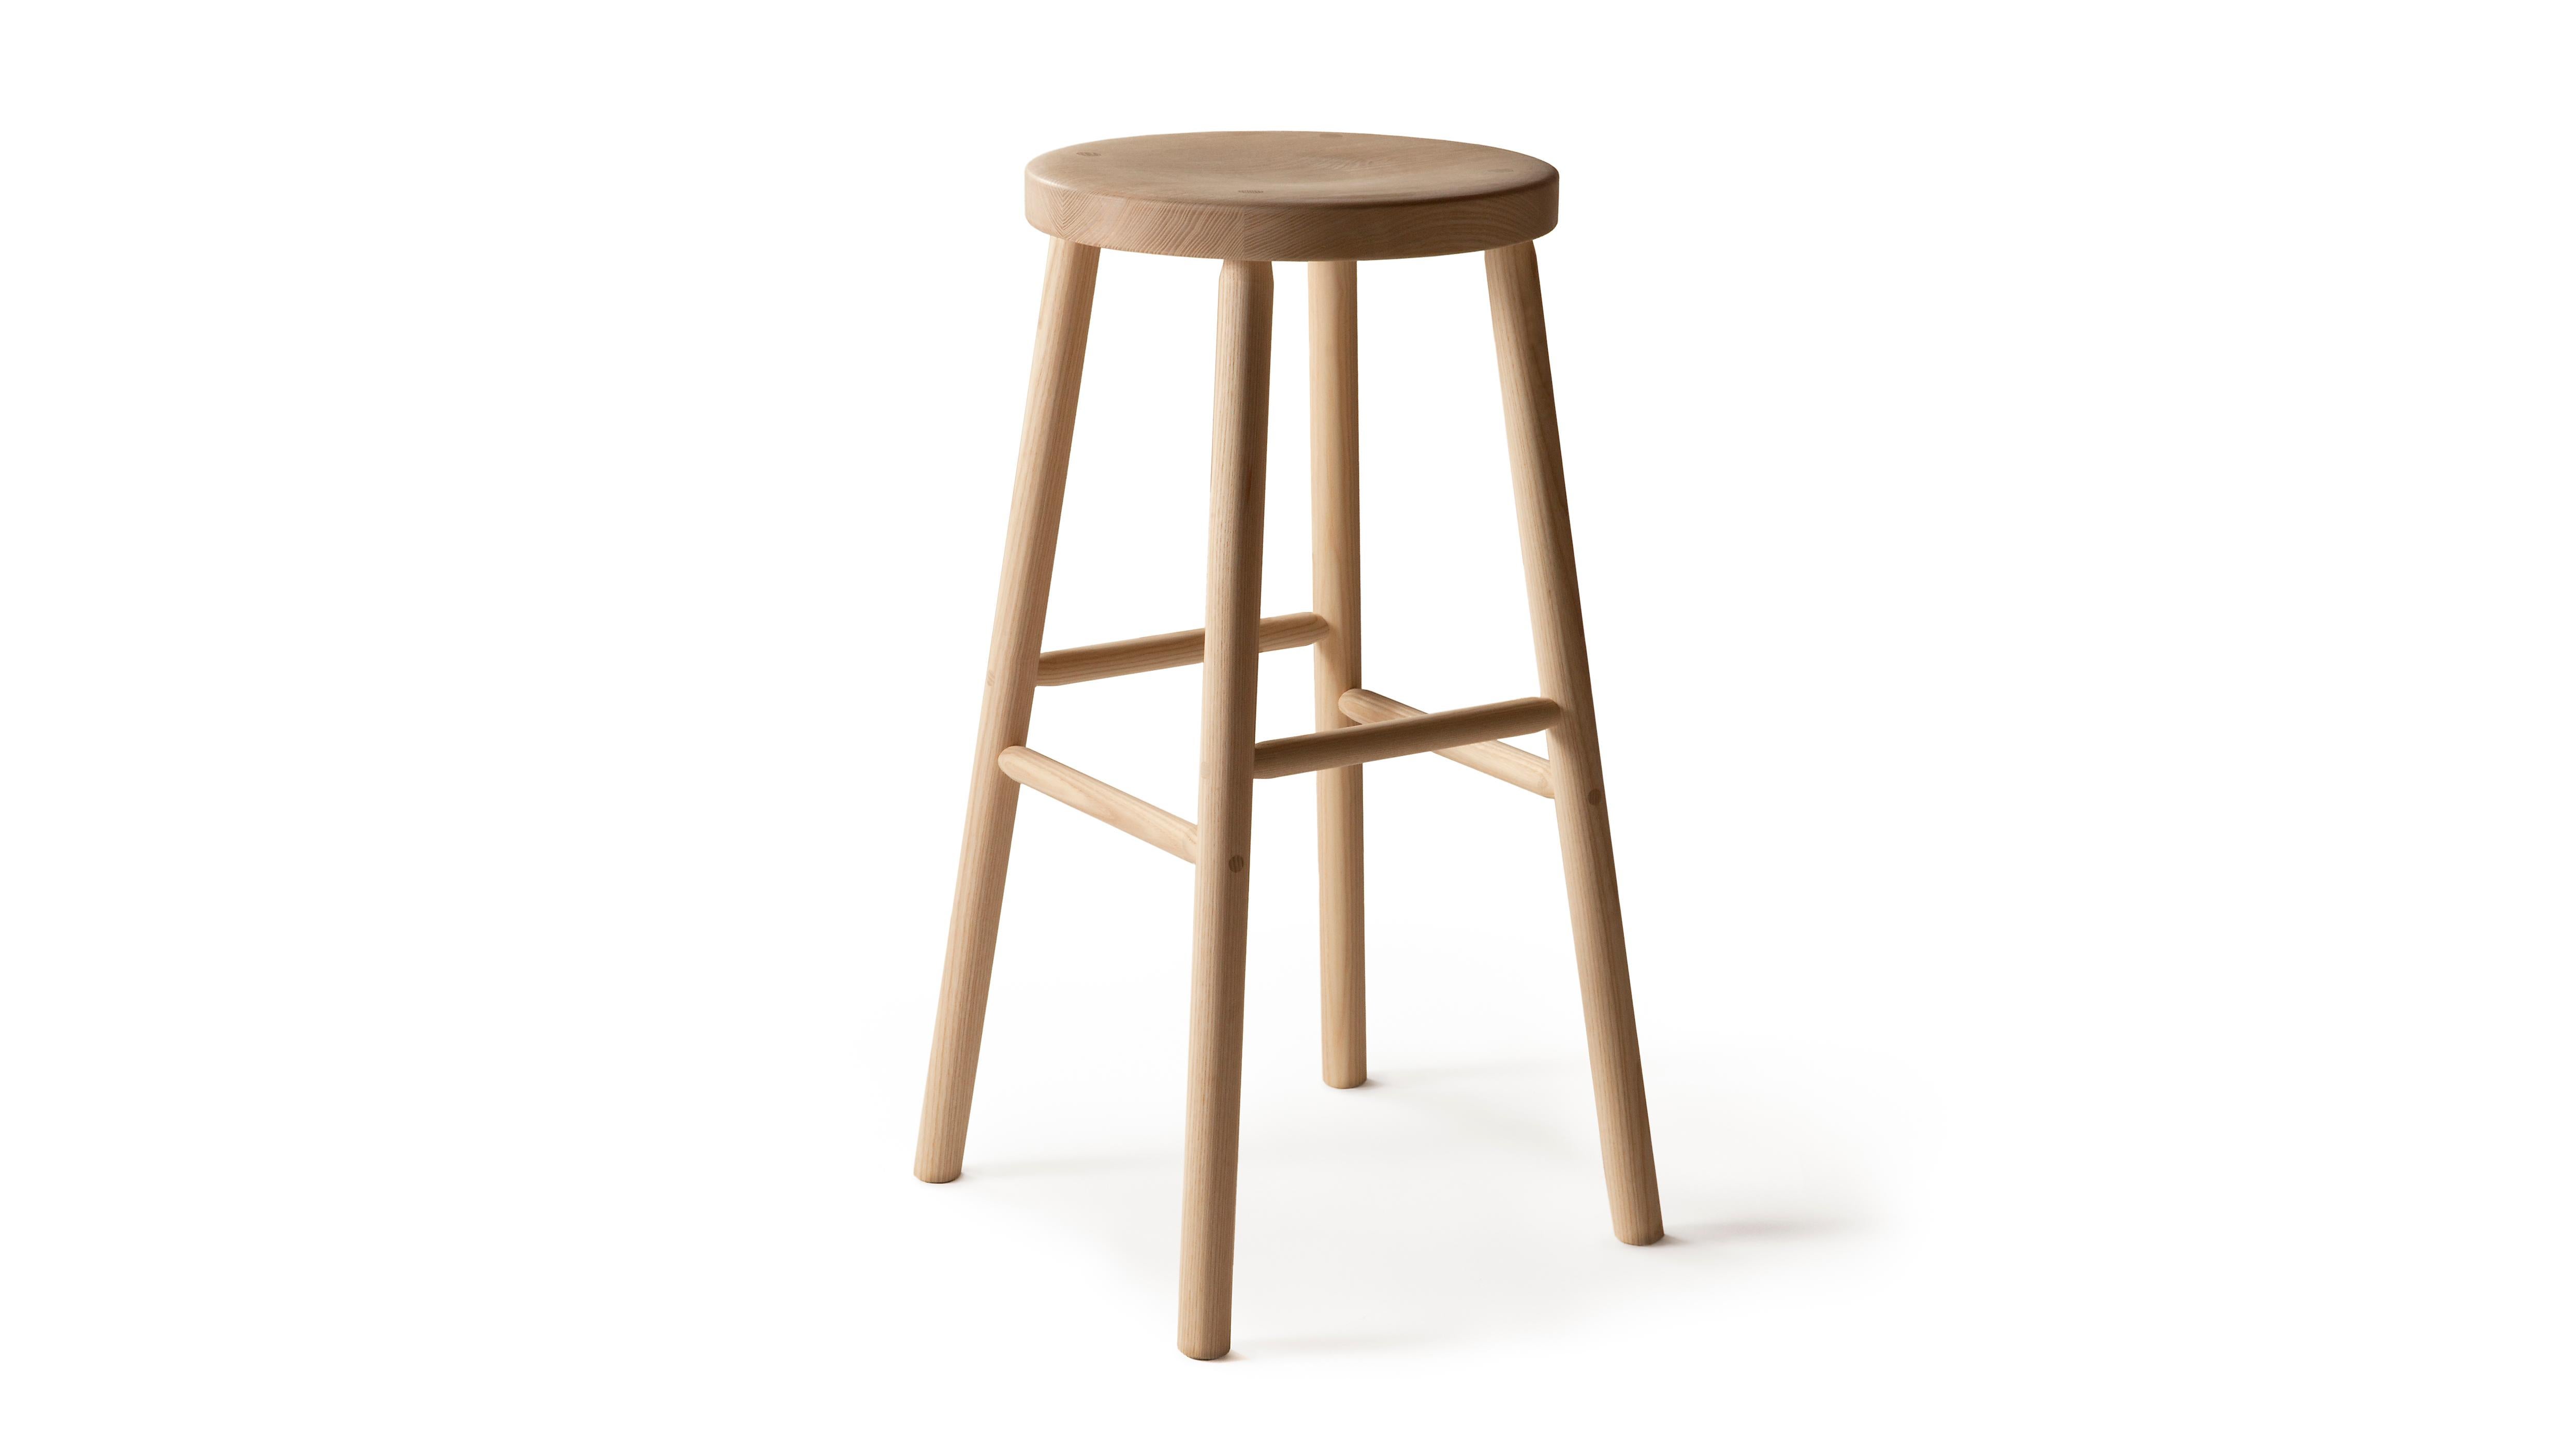 The four-legged stool is designed for both contract environment and domestic use with durable joints, comfortable seat and three different heights. Its Nordic craftsmanship soul can be spotted in the delicate joinery details, where the designer –